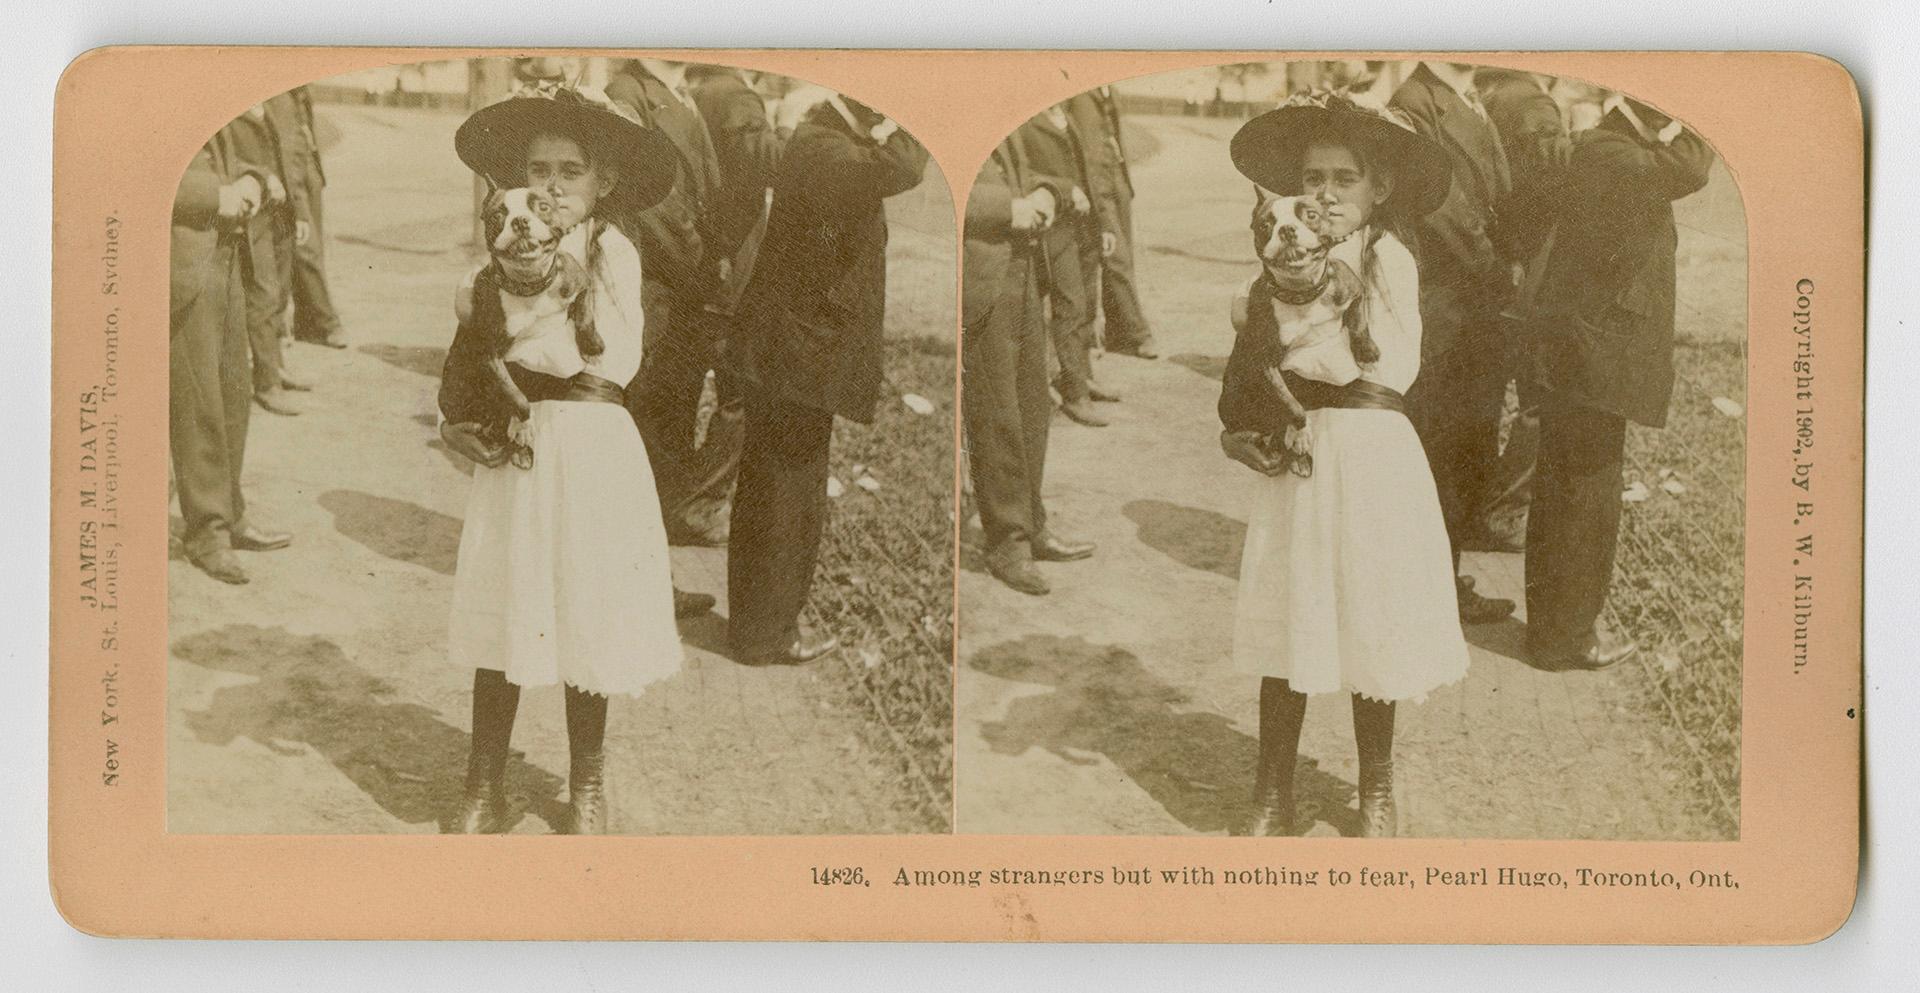 Pictures show a little girl in a white dress holding a medium sized dog.